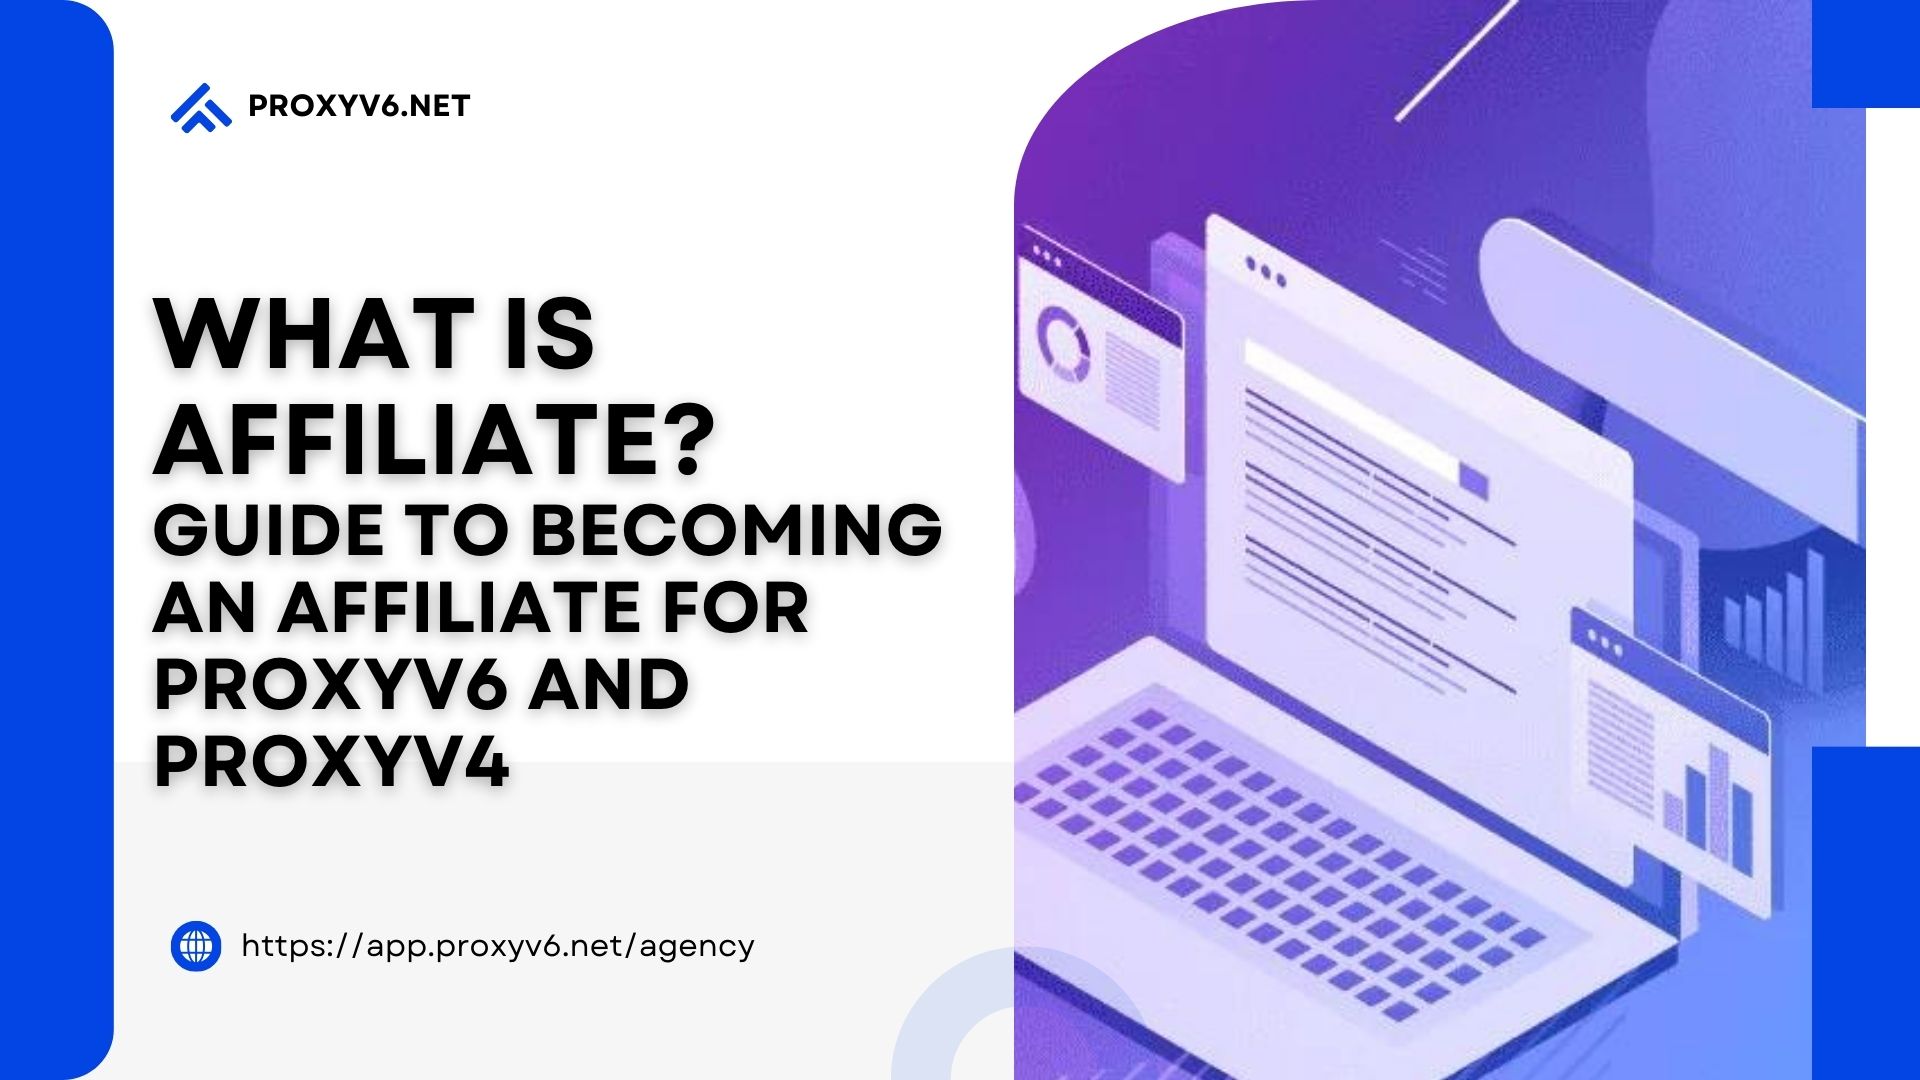 What is Affiliate? Guide to becoming an Affiliate for proxyv6 and proxyv4